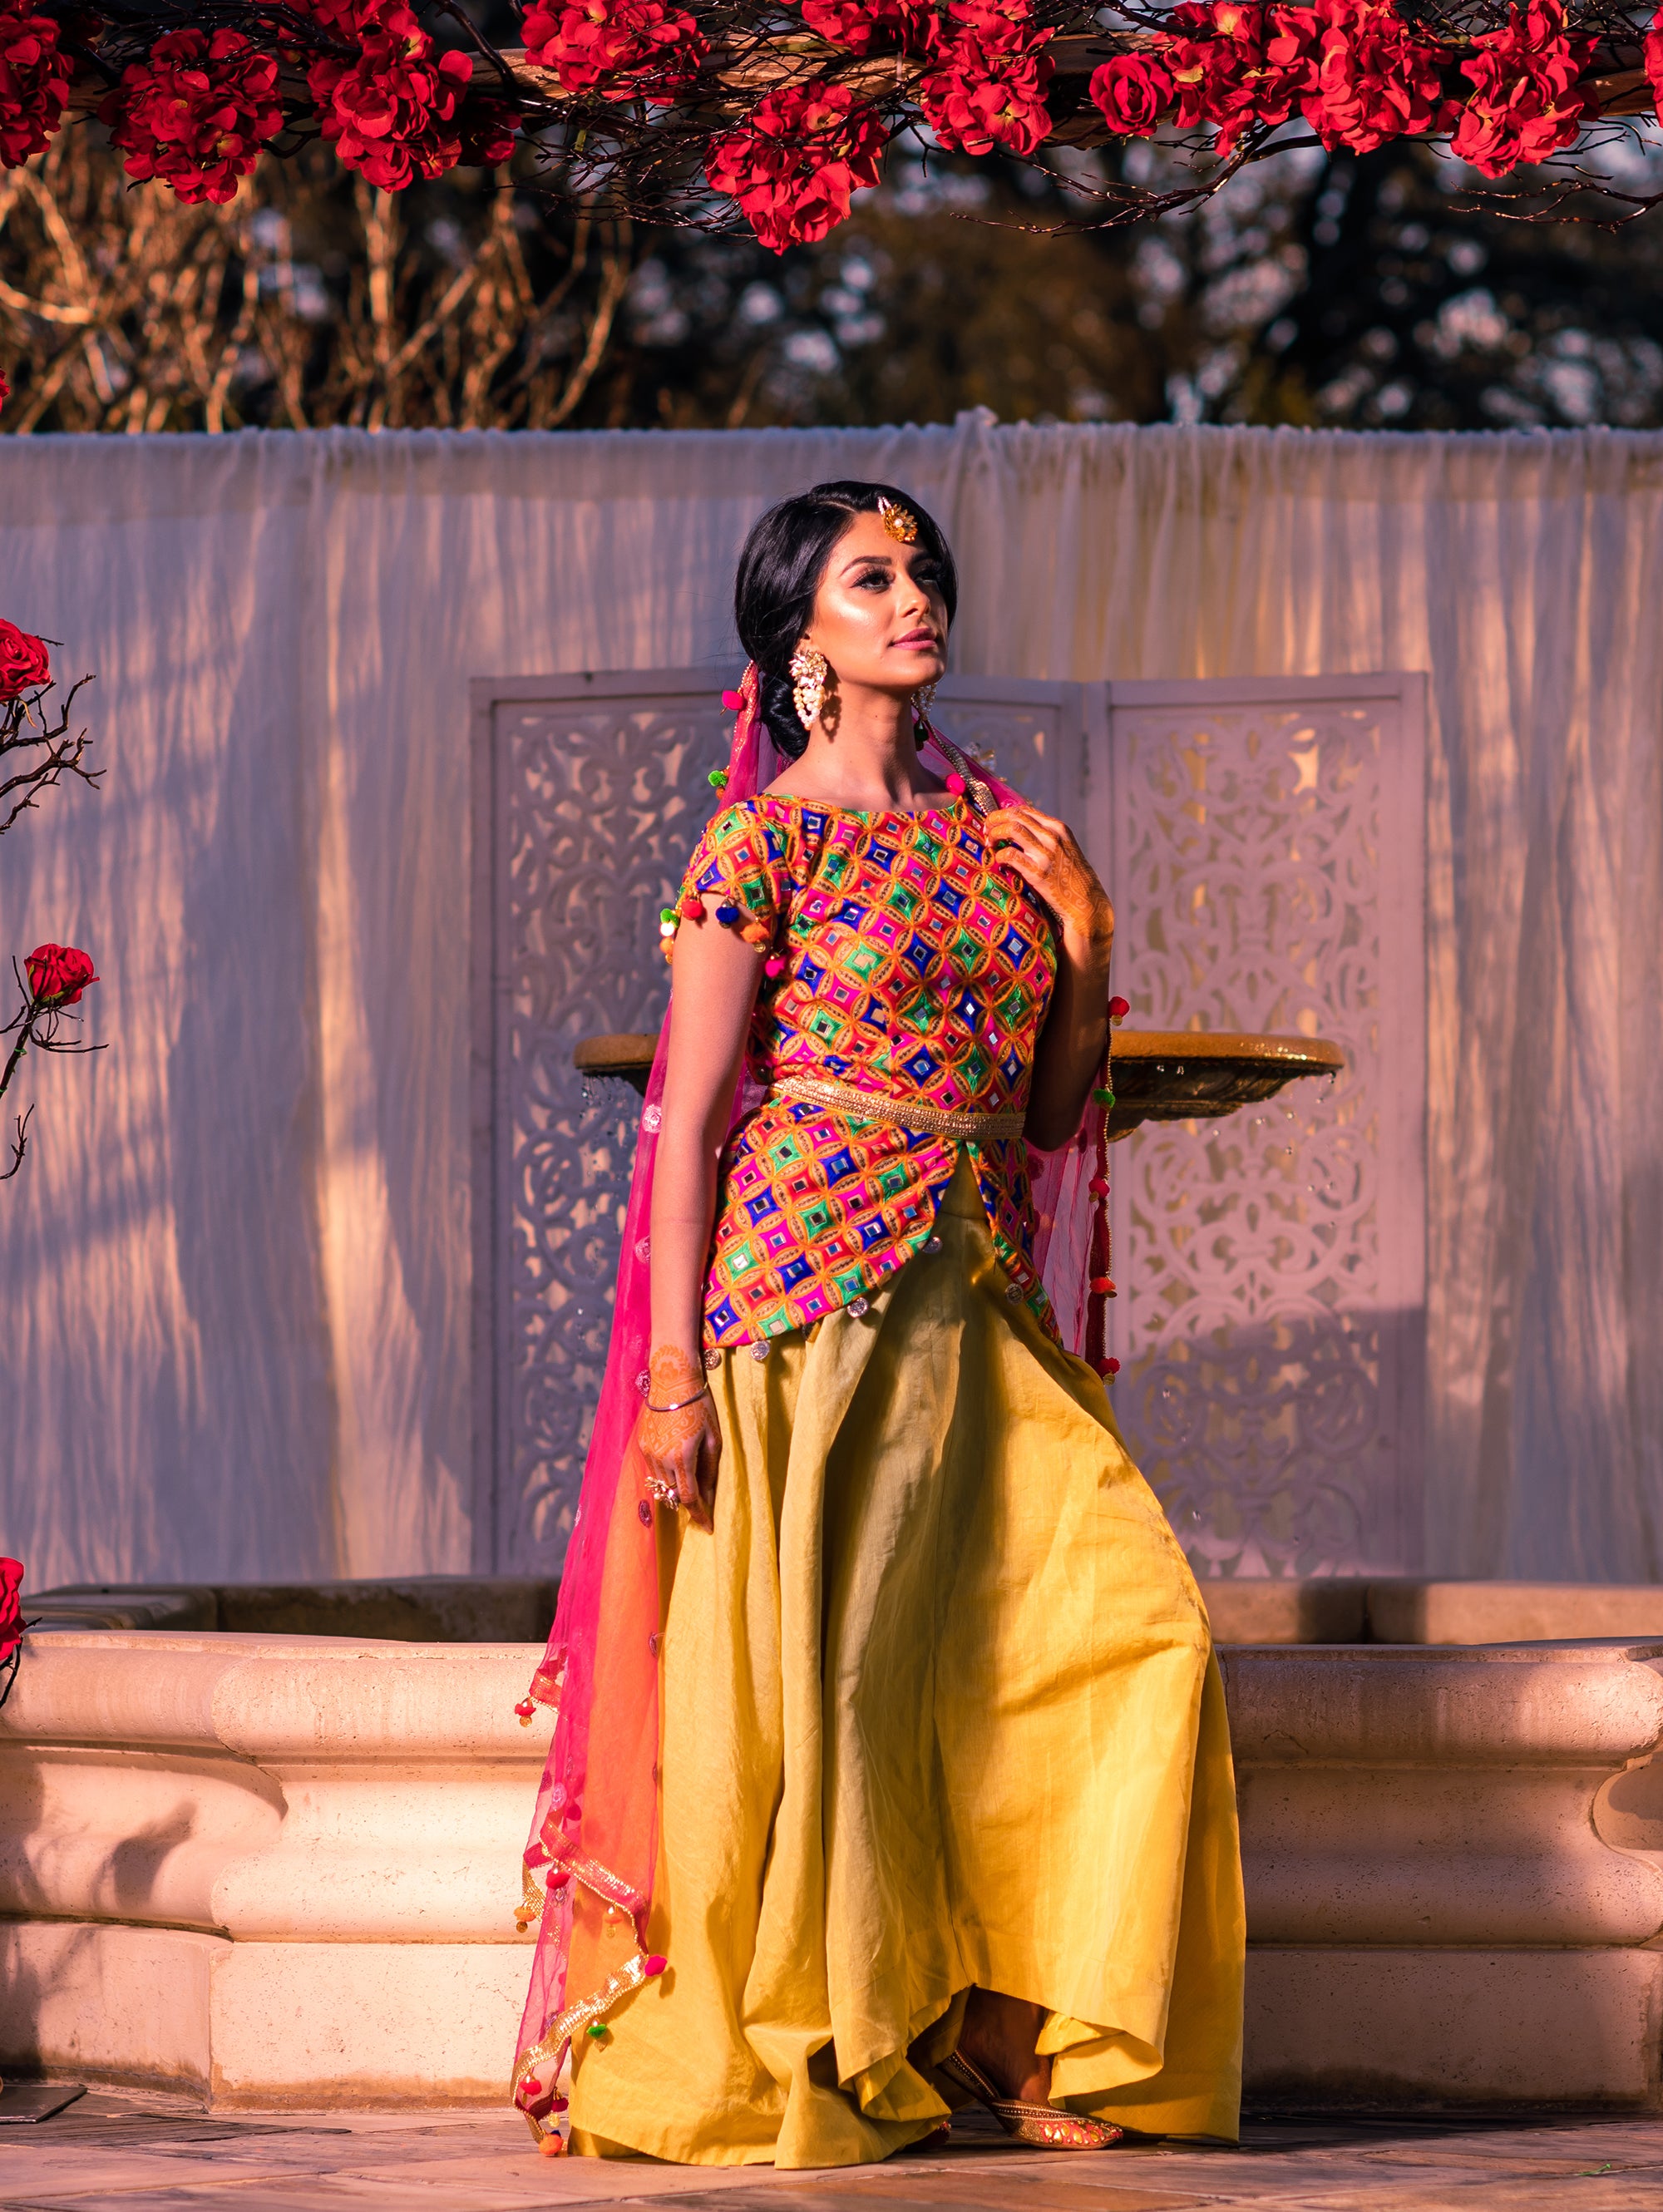 Ways To Add Phulkari Embroidery In Wedding Outfits